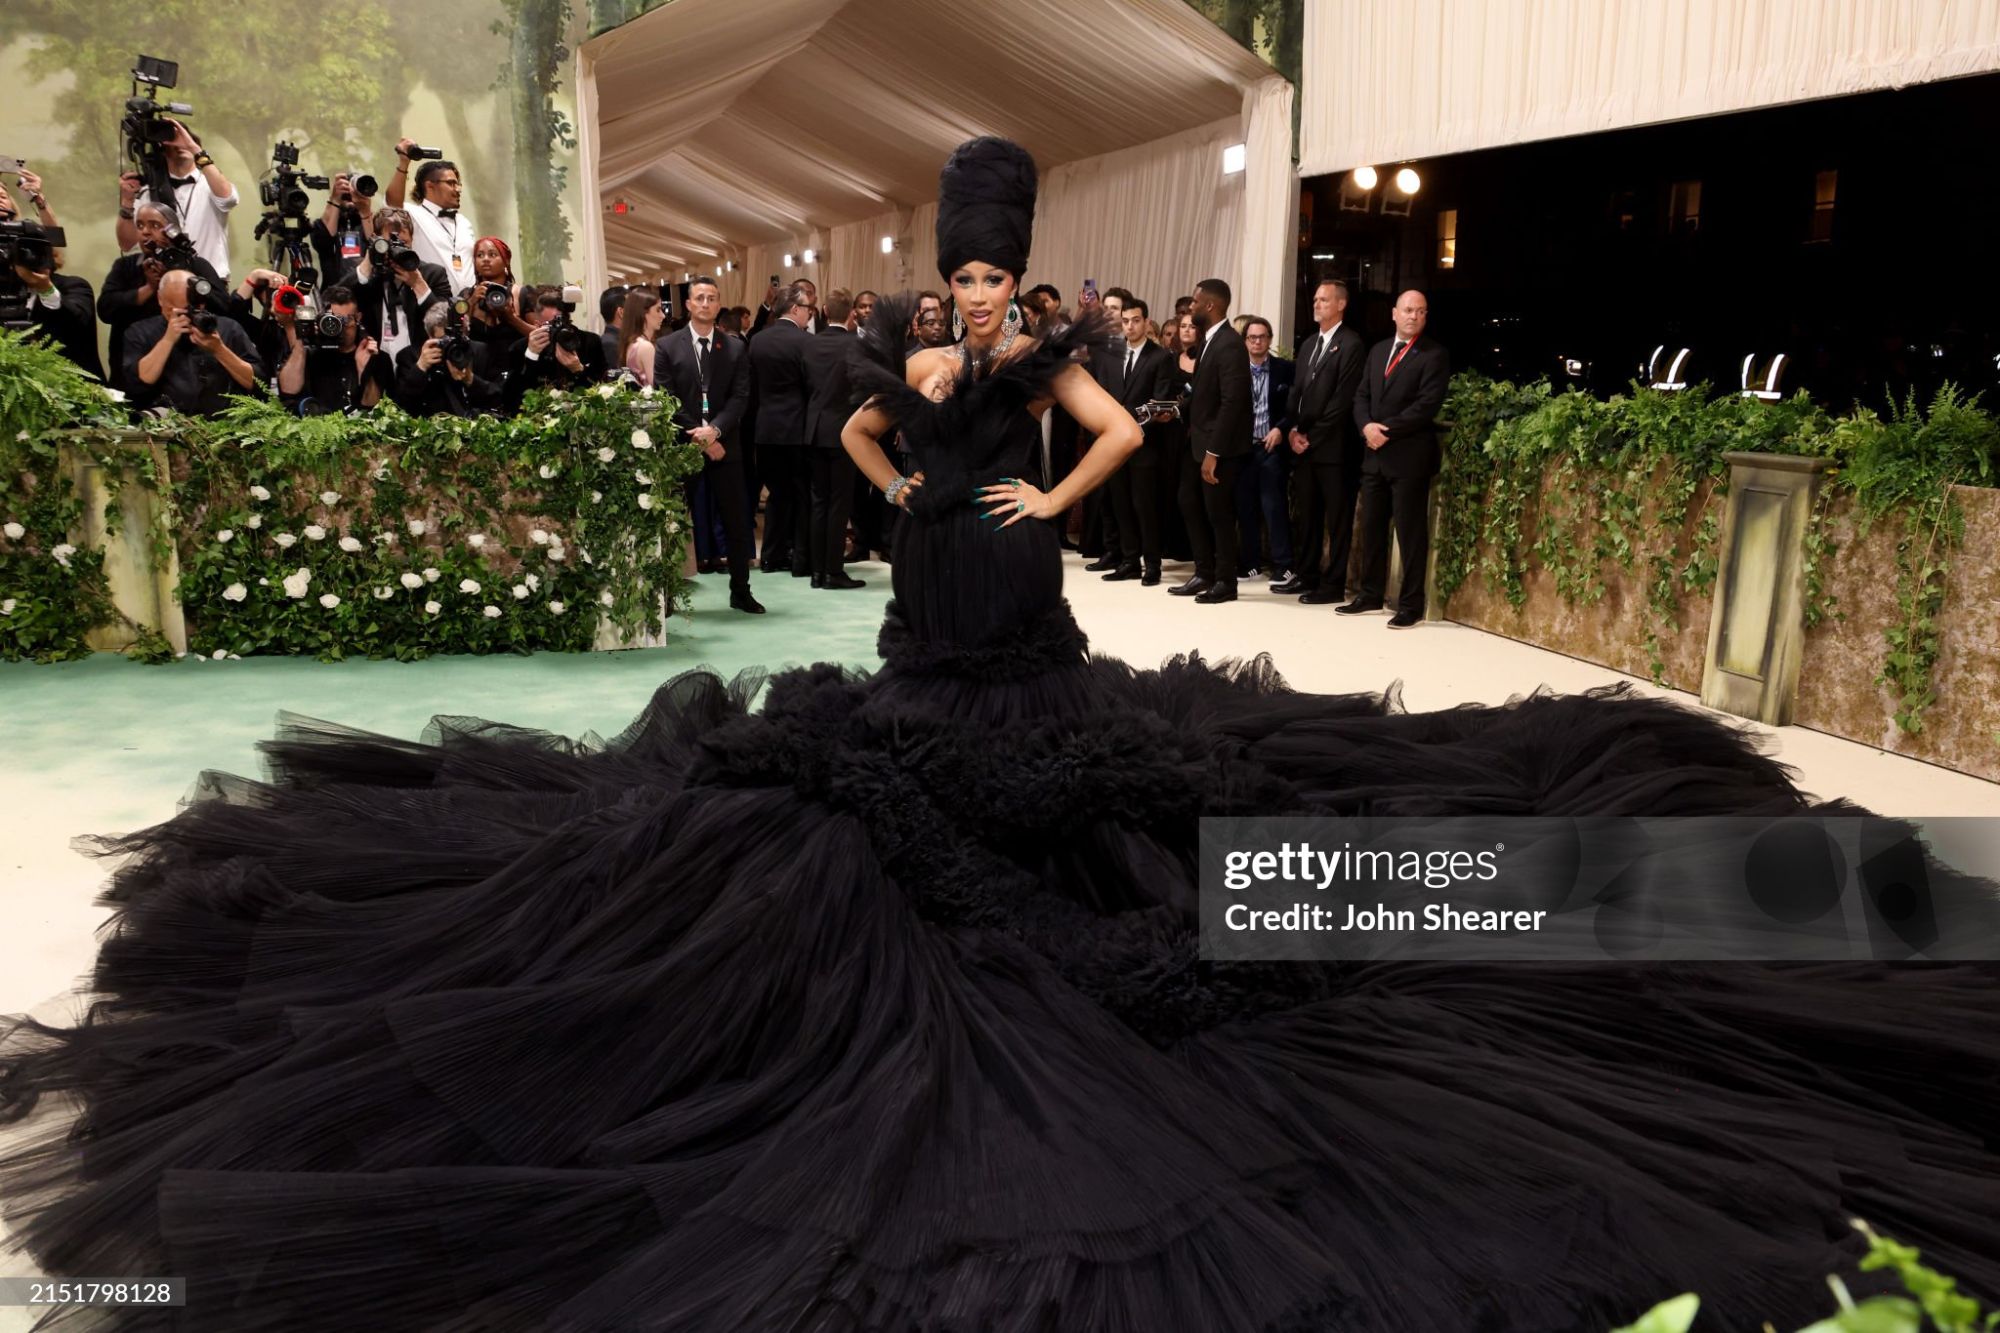 gettyimages-2151798128-2048x2048.jpg